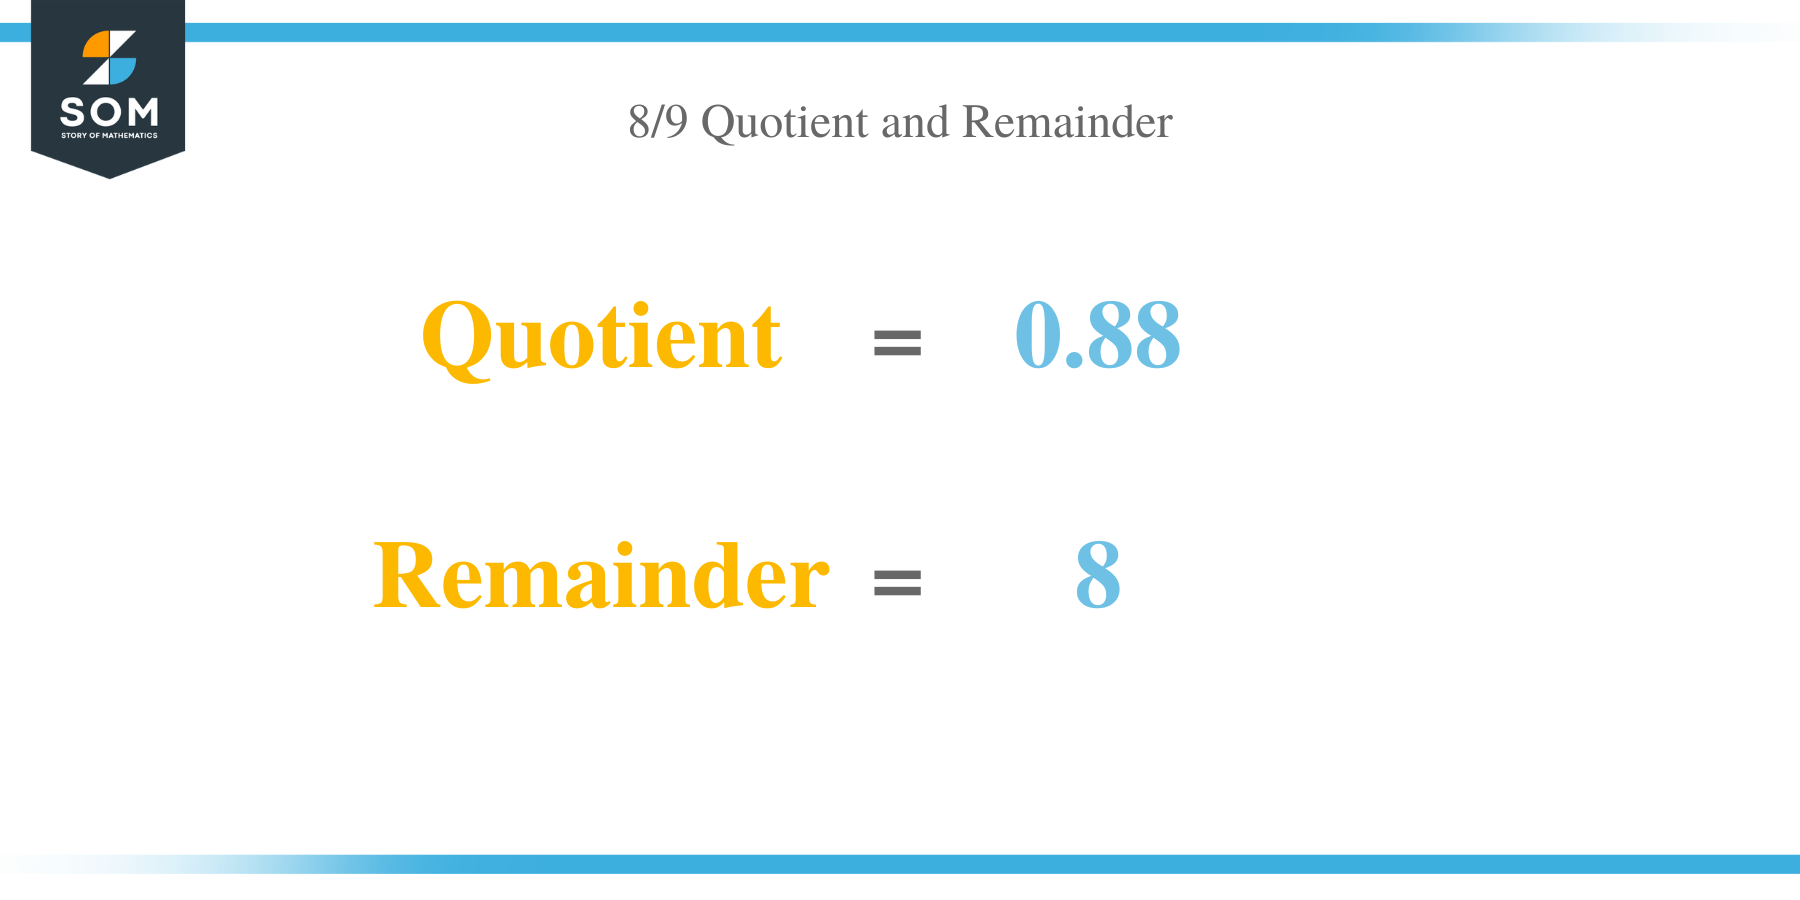 Quotient and Remainer of 8 per 9